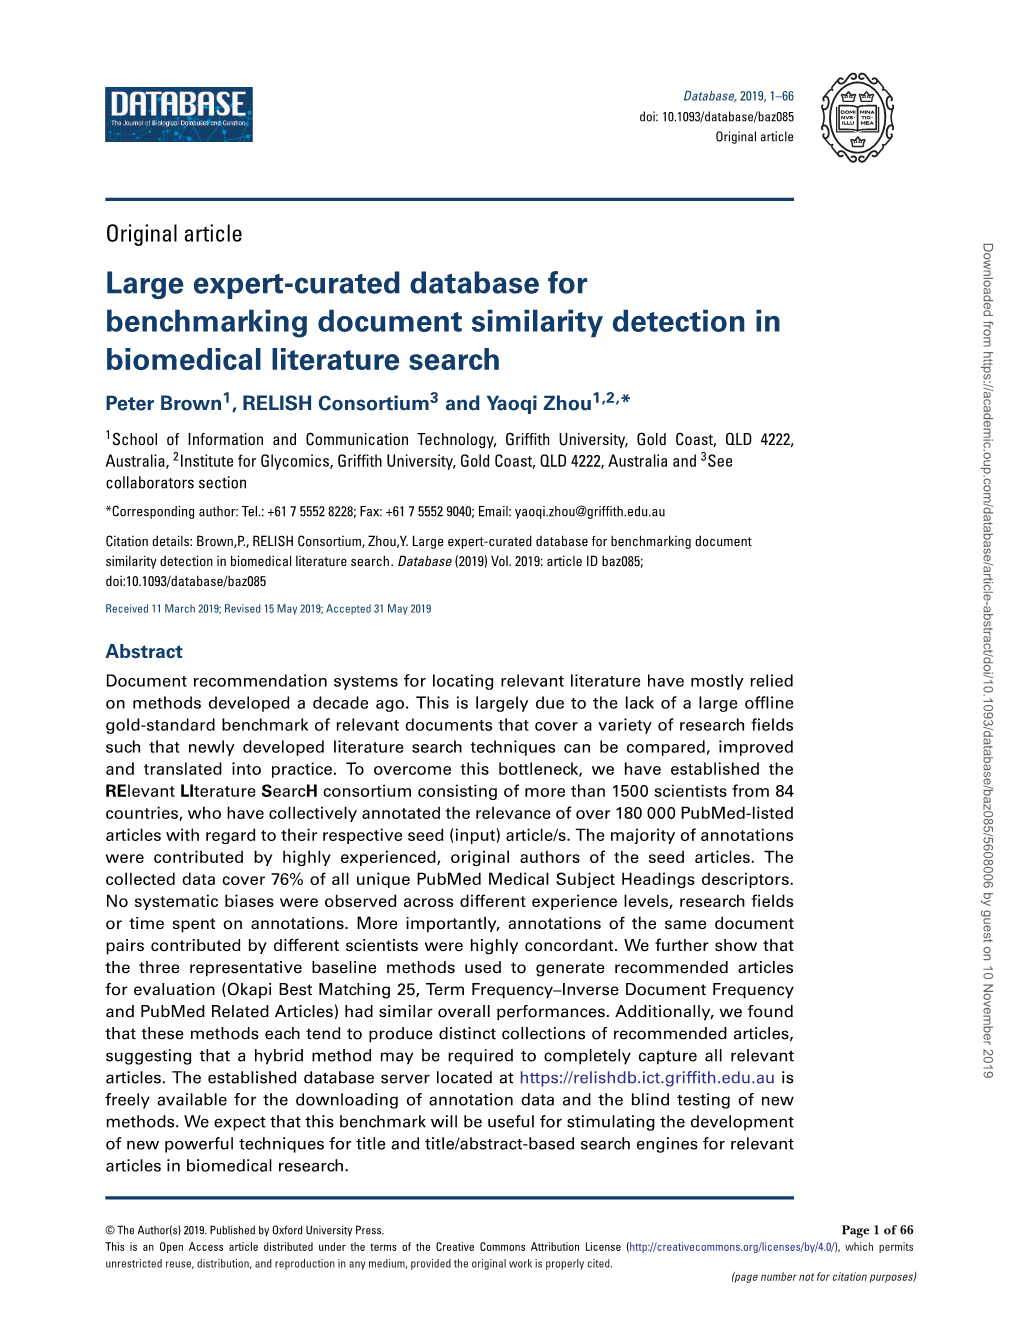 Large Expert-Curated Database for Benchmarking Document Similarity Detection in Biomedical Literature Search Peter Brown1,Relishconsortium3 and Yaoqi Zhou1,2,*